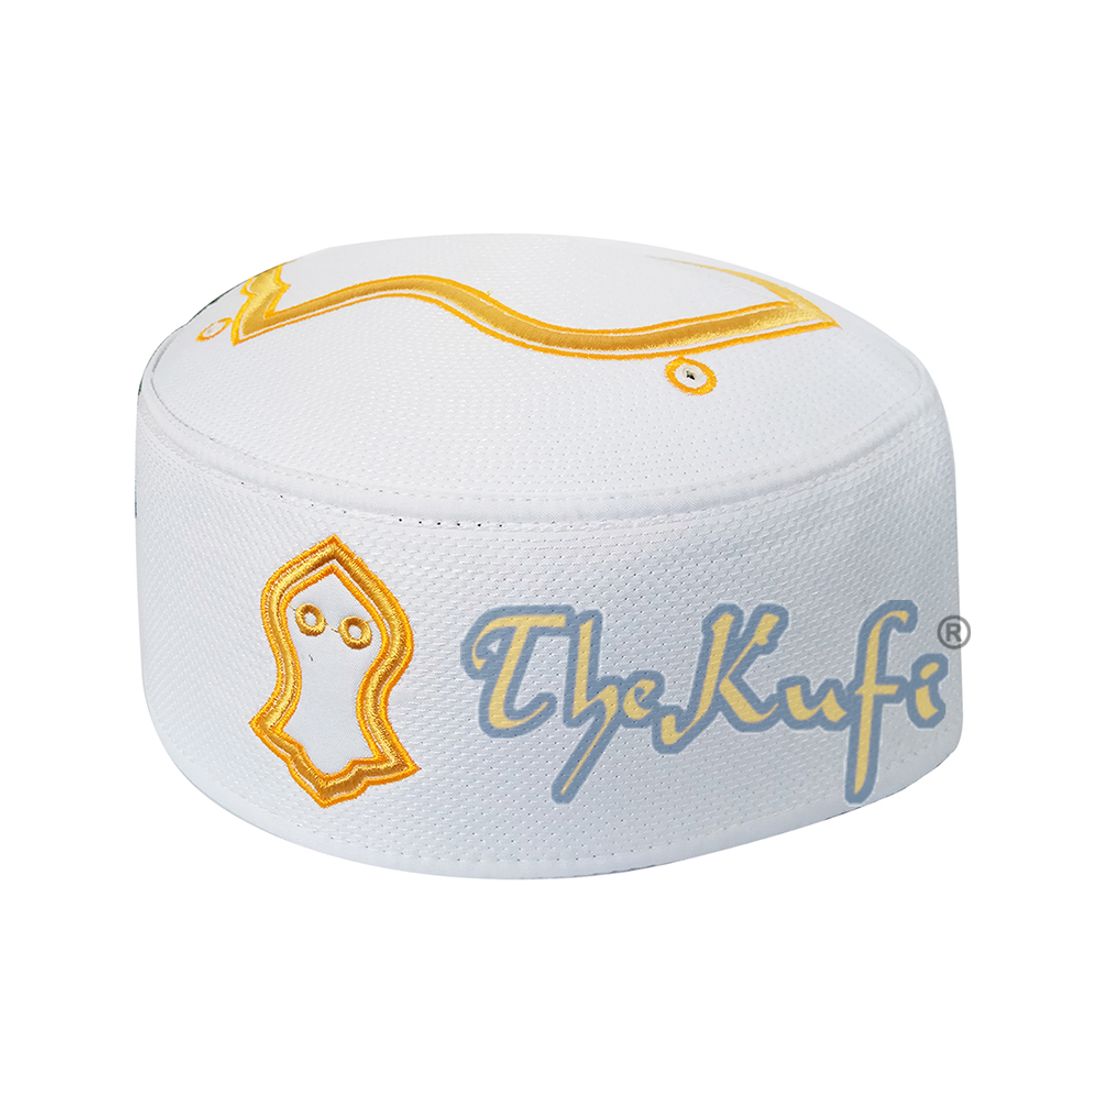 Rigid White Golden Embroidered Sandal Kufi Crown